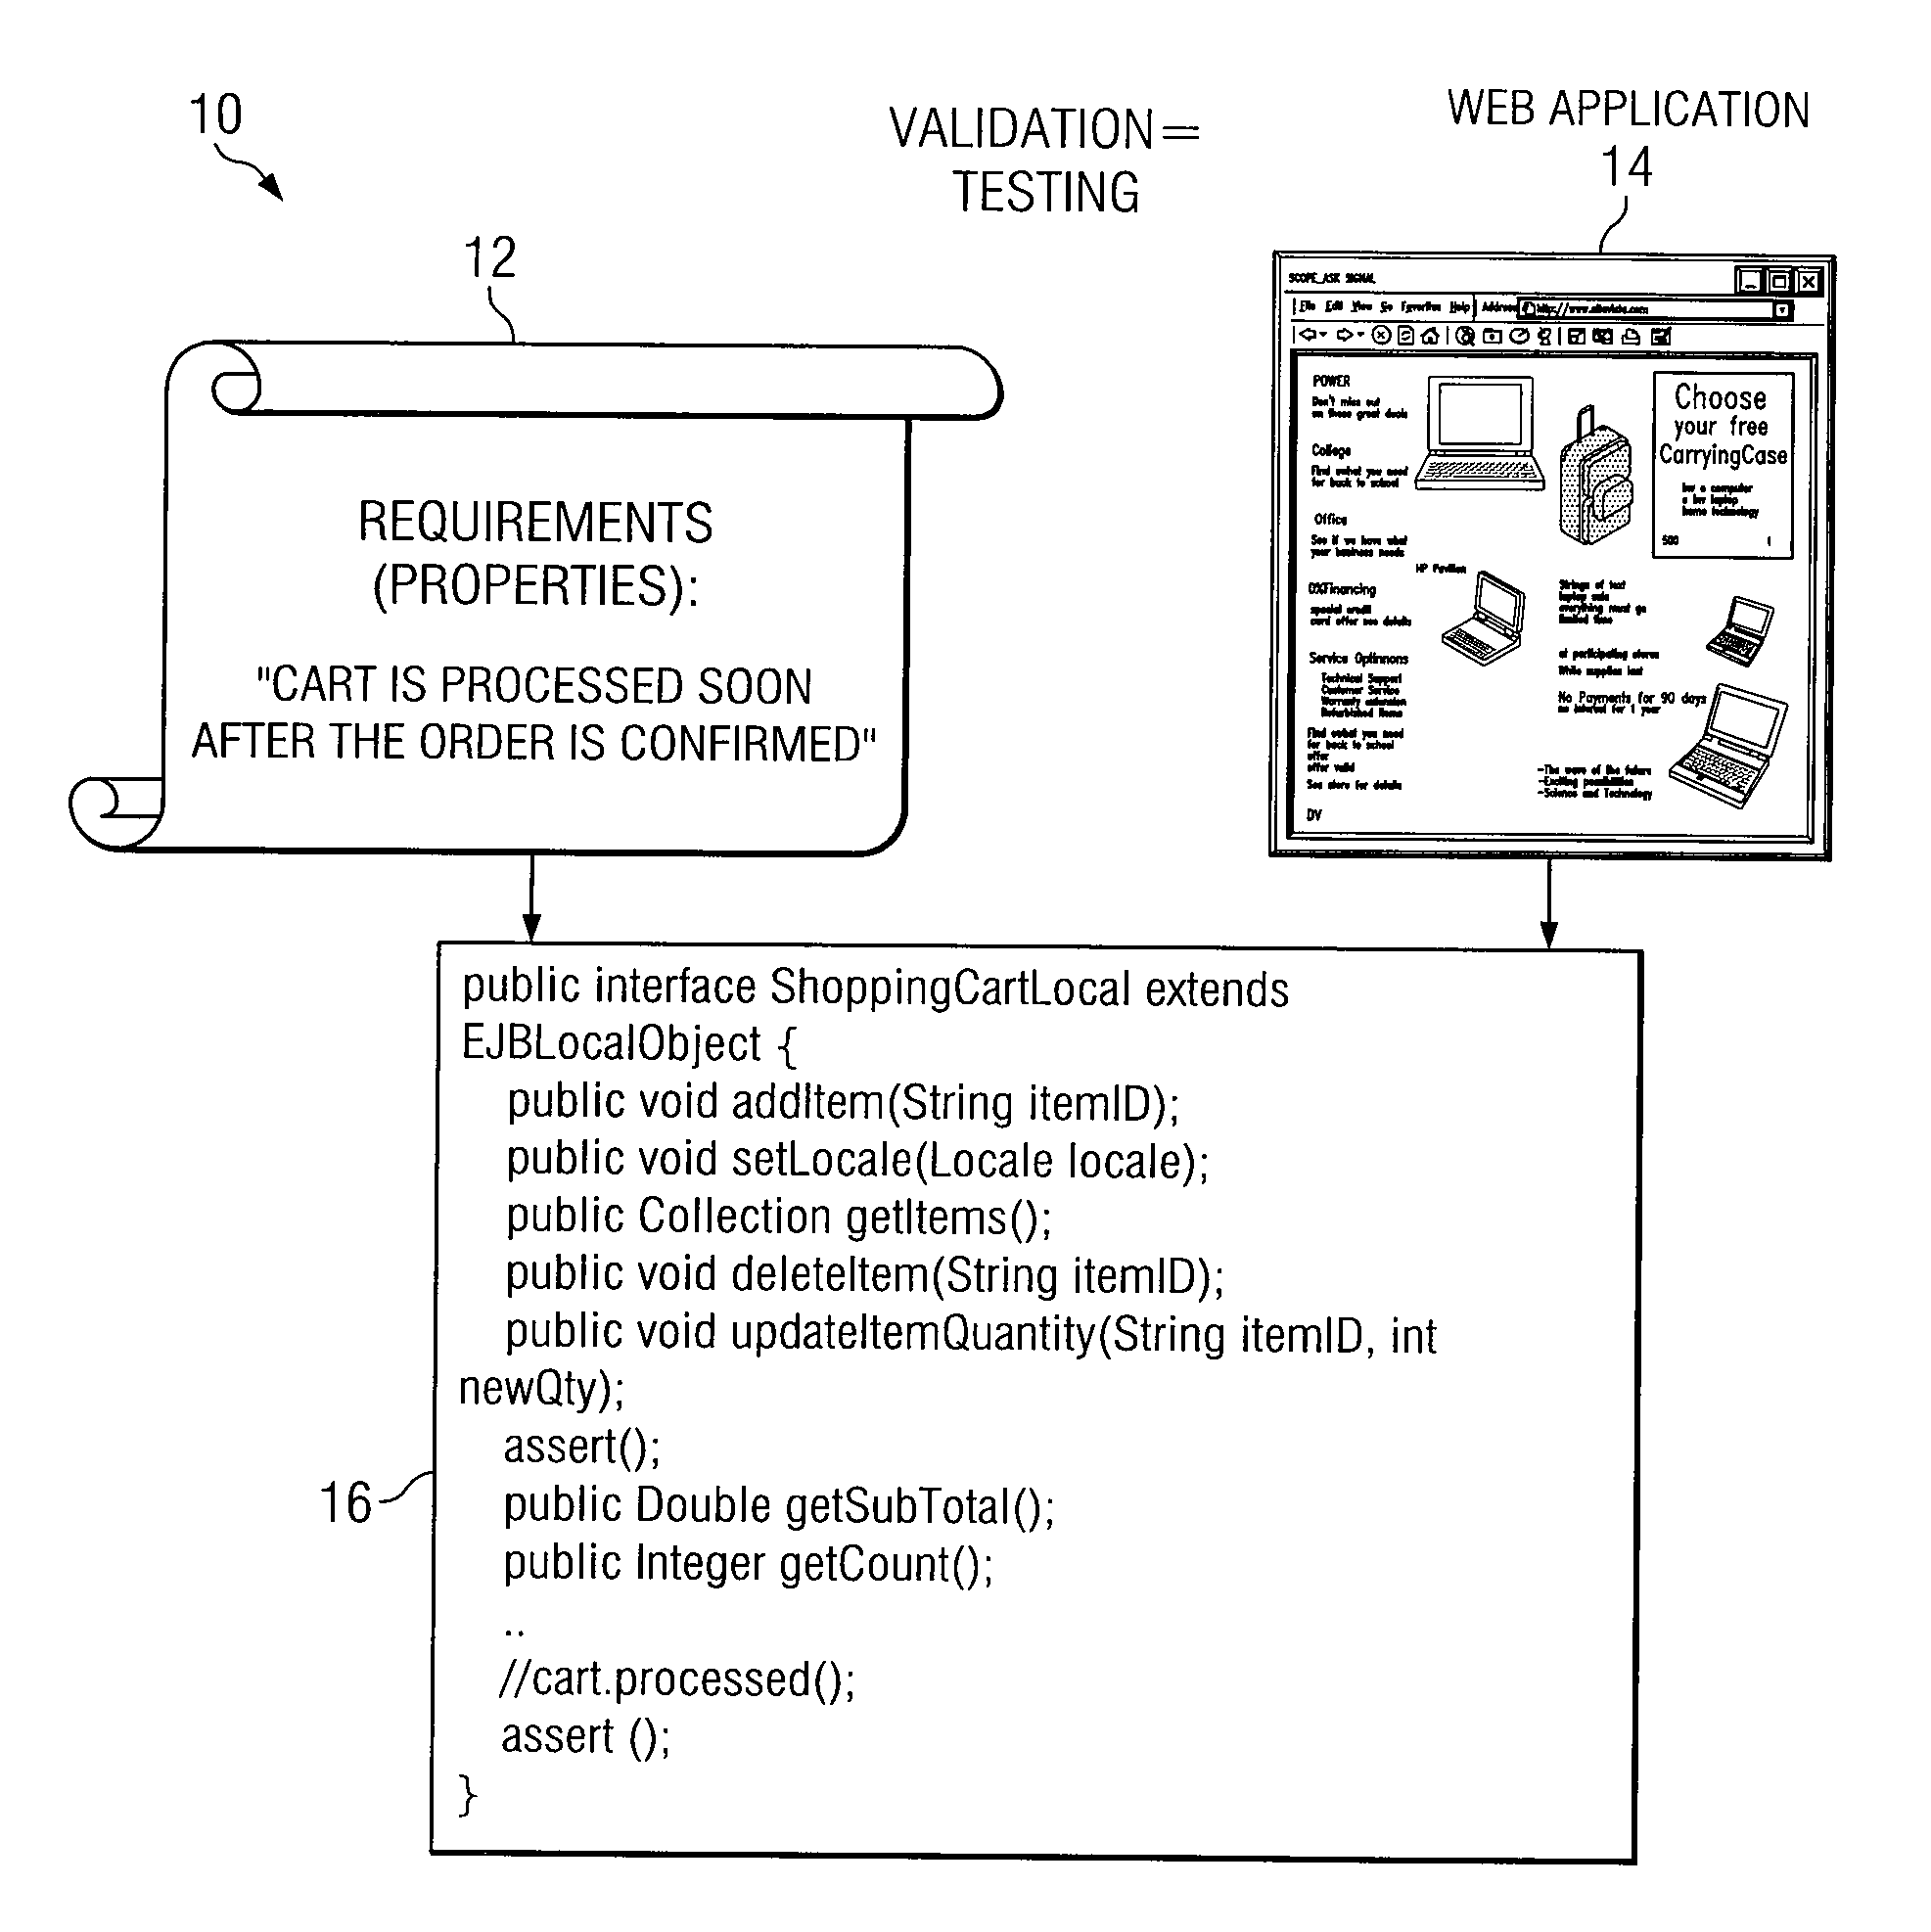 Configurable Web Services System and a Method to Detect Defects in Software Applications